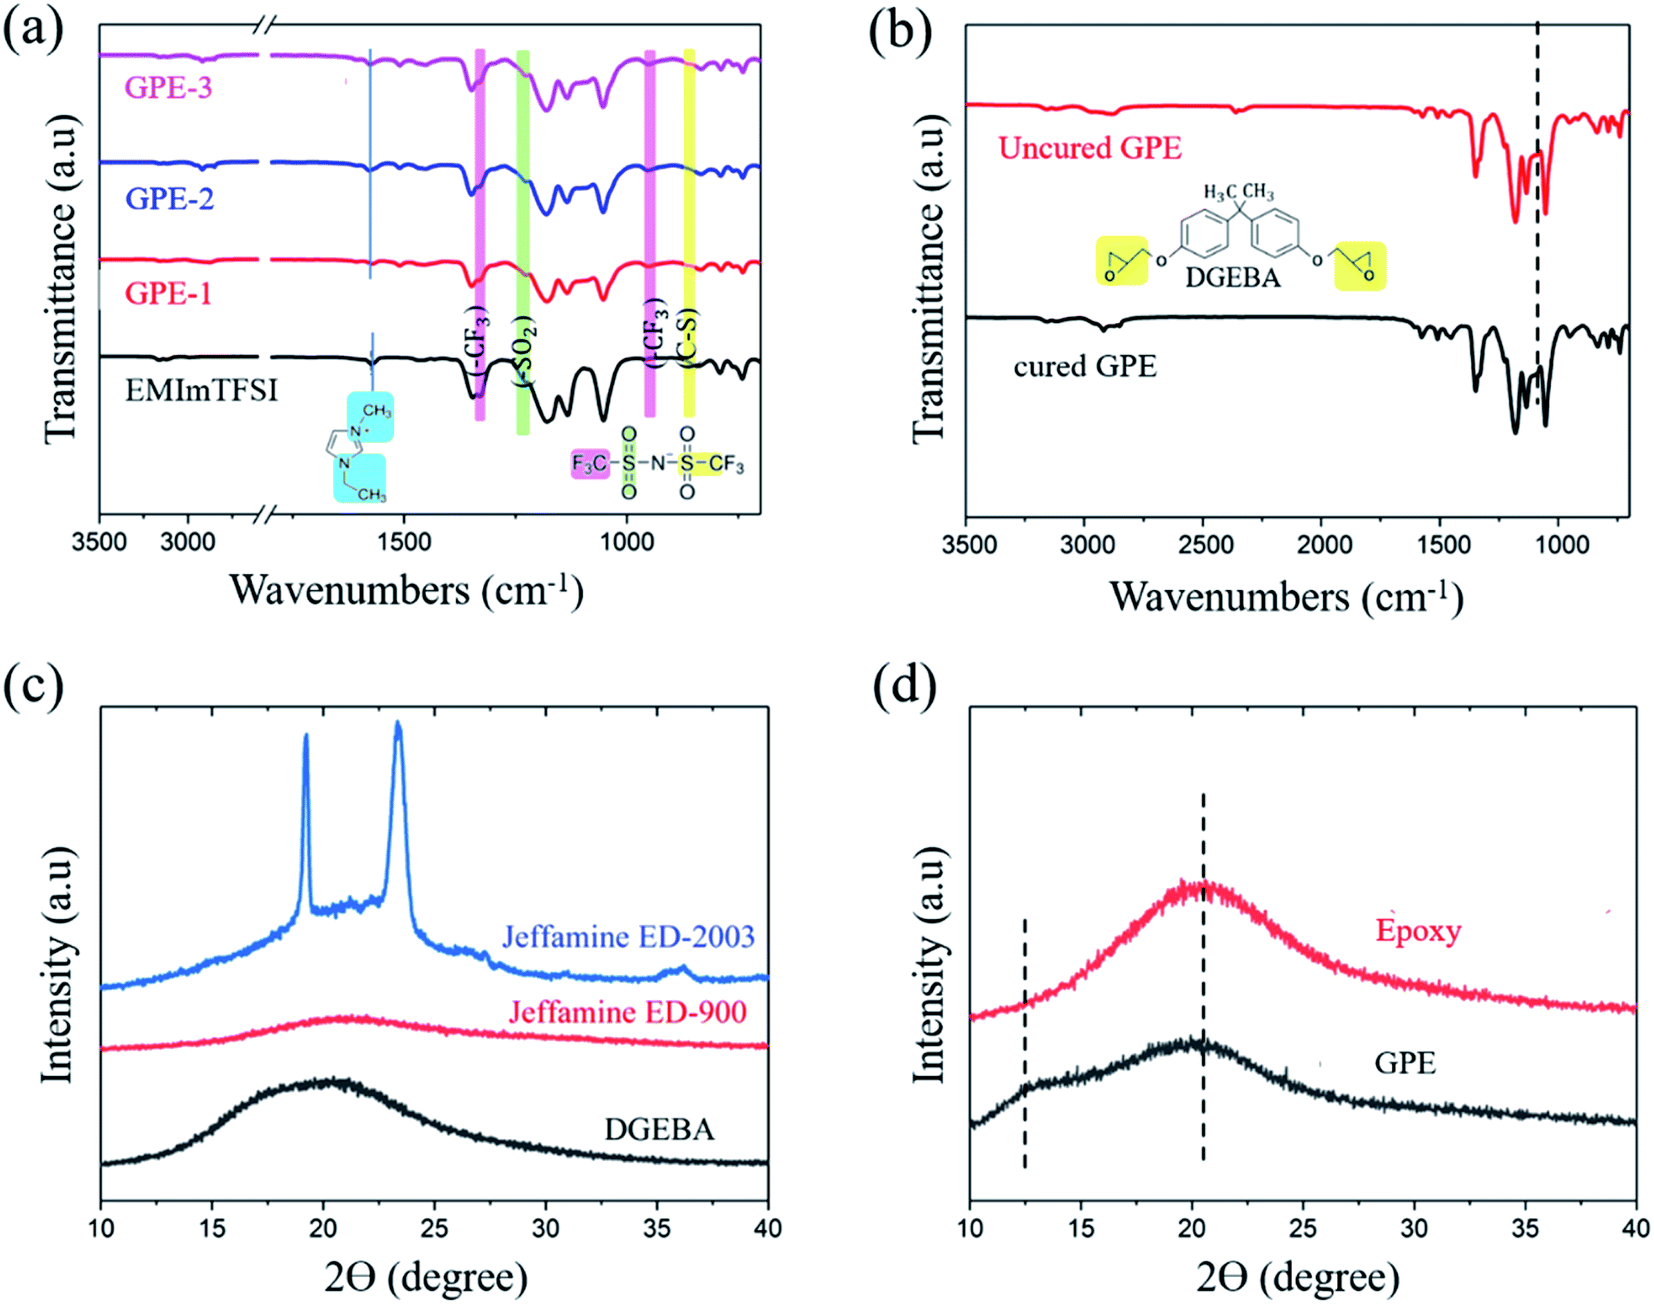 A Chemically Bonded Supercapacitor Using A Highly Stretchable And Adhesive Gel Polymer Electrolyte Based On An Ionic Liquid And Epoxy Triblock Diamine Rsc Advances Rsc Publishing Doi 10 1039 D0rab